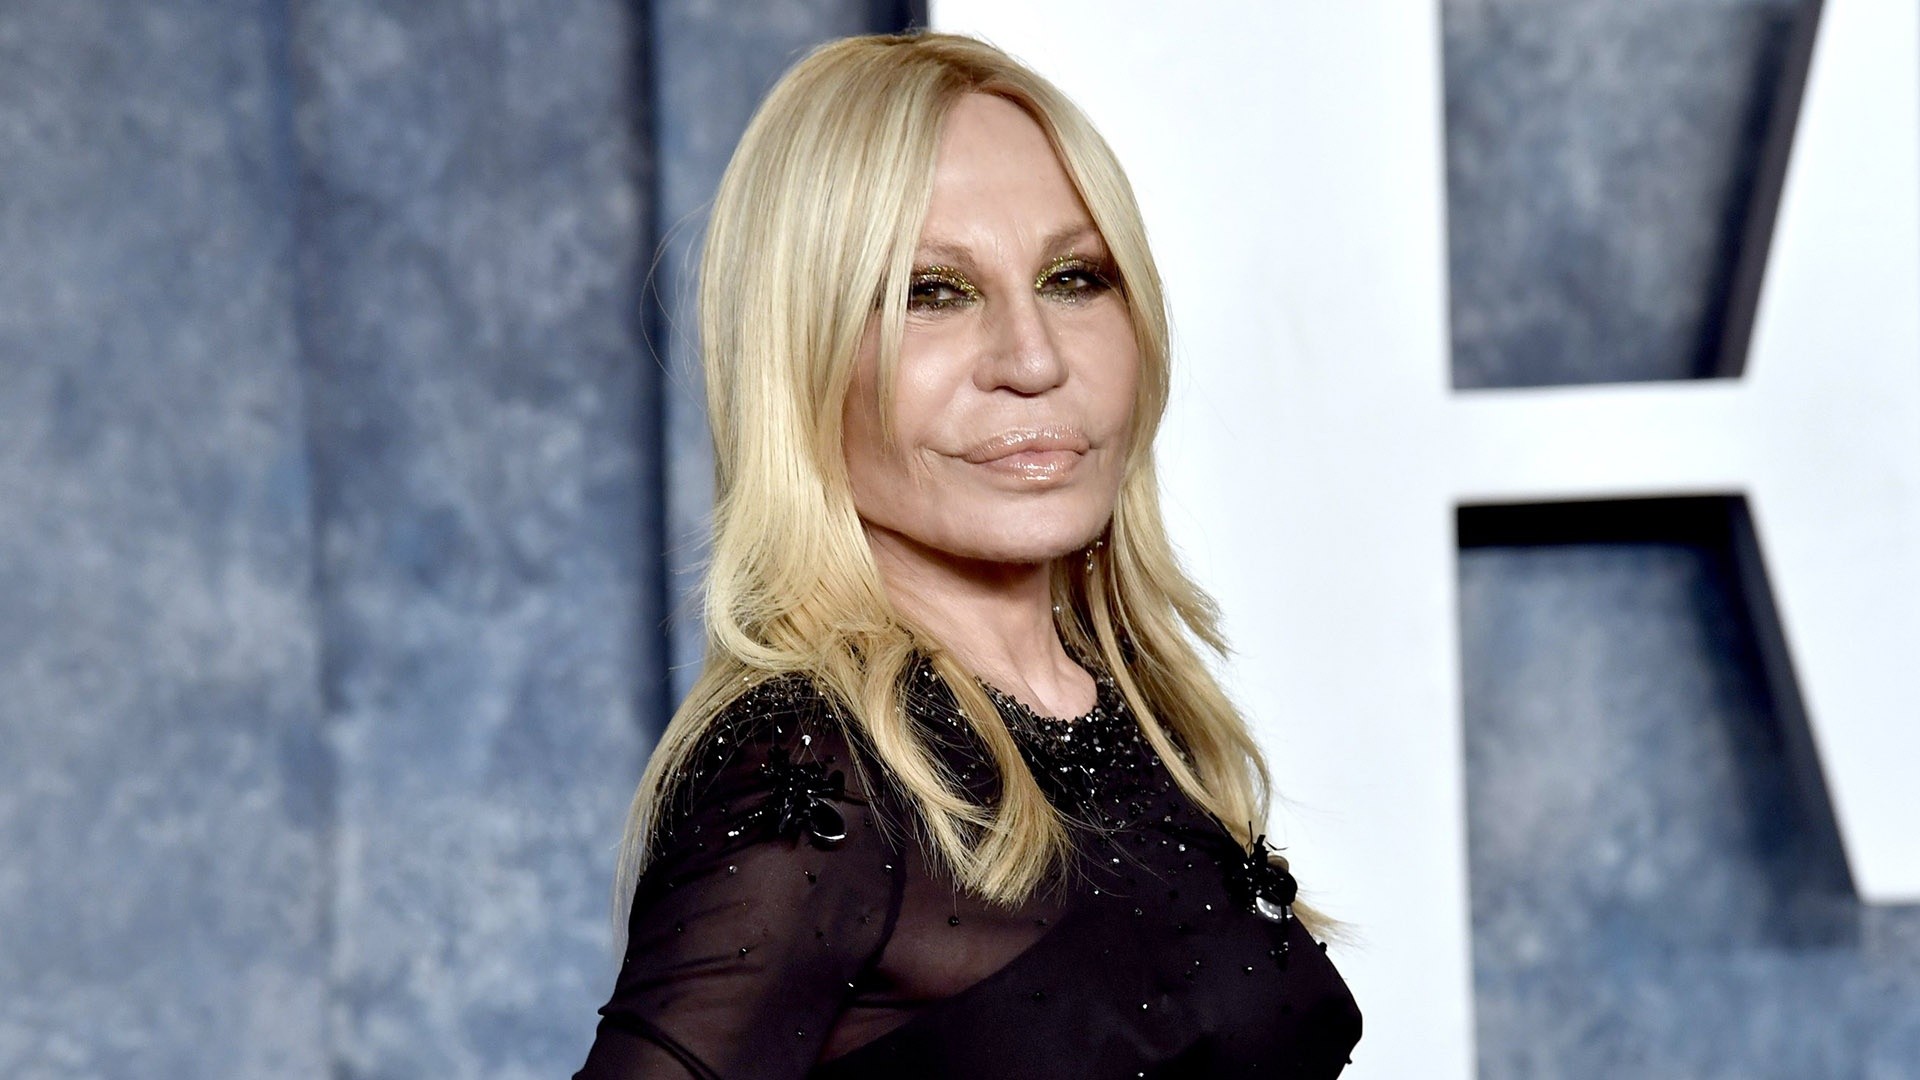 Donatella Versace on hosting her biggest fashion show ever